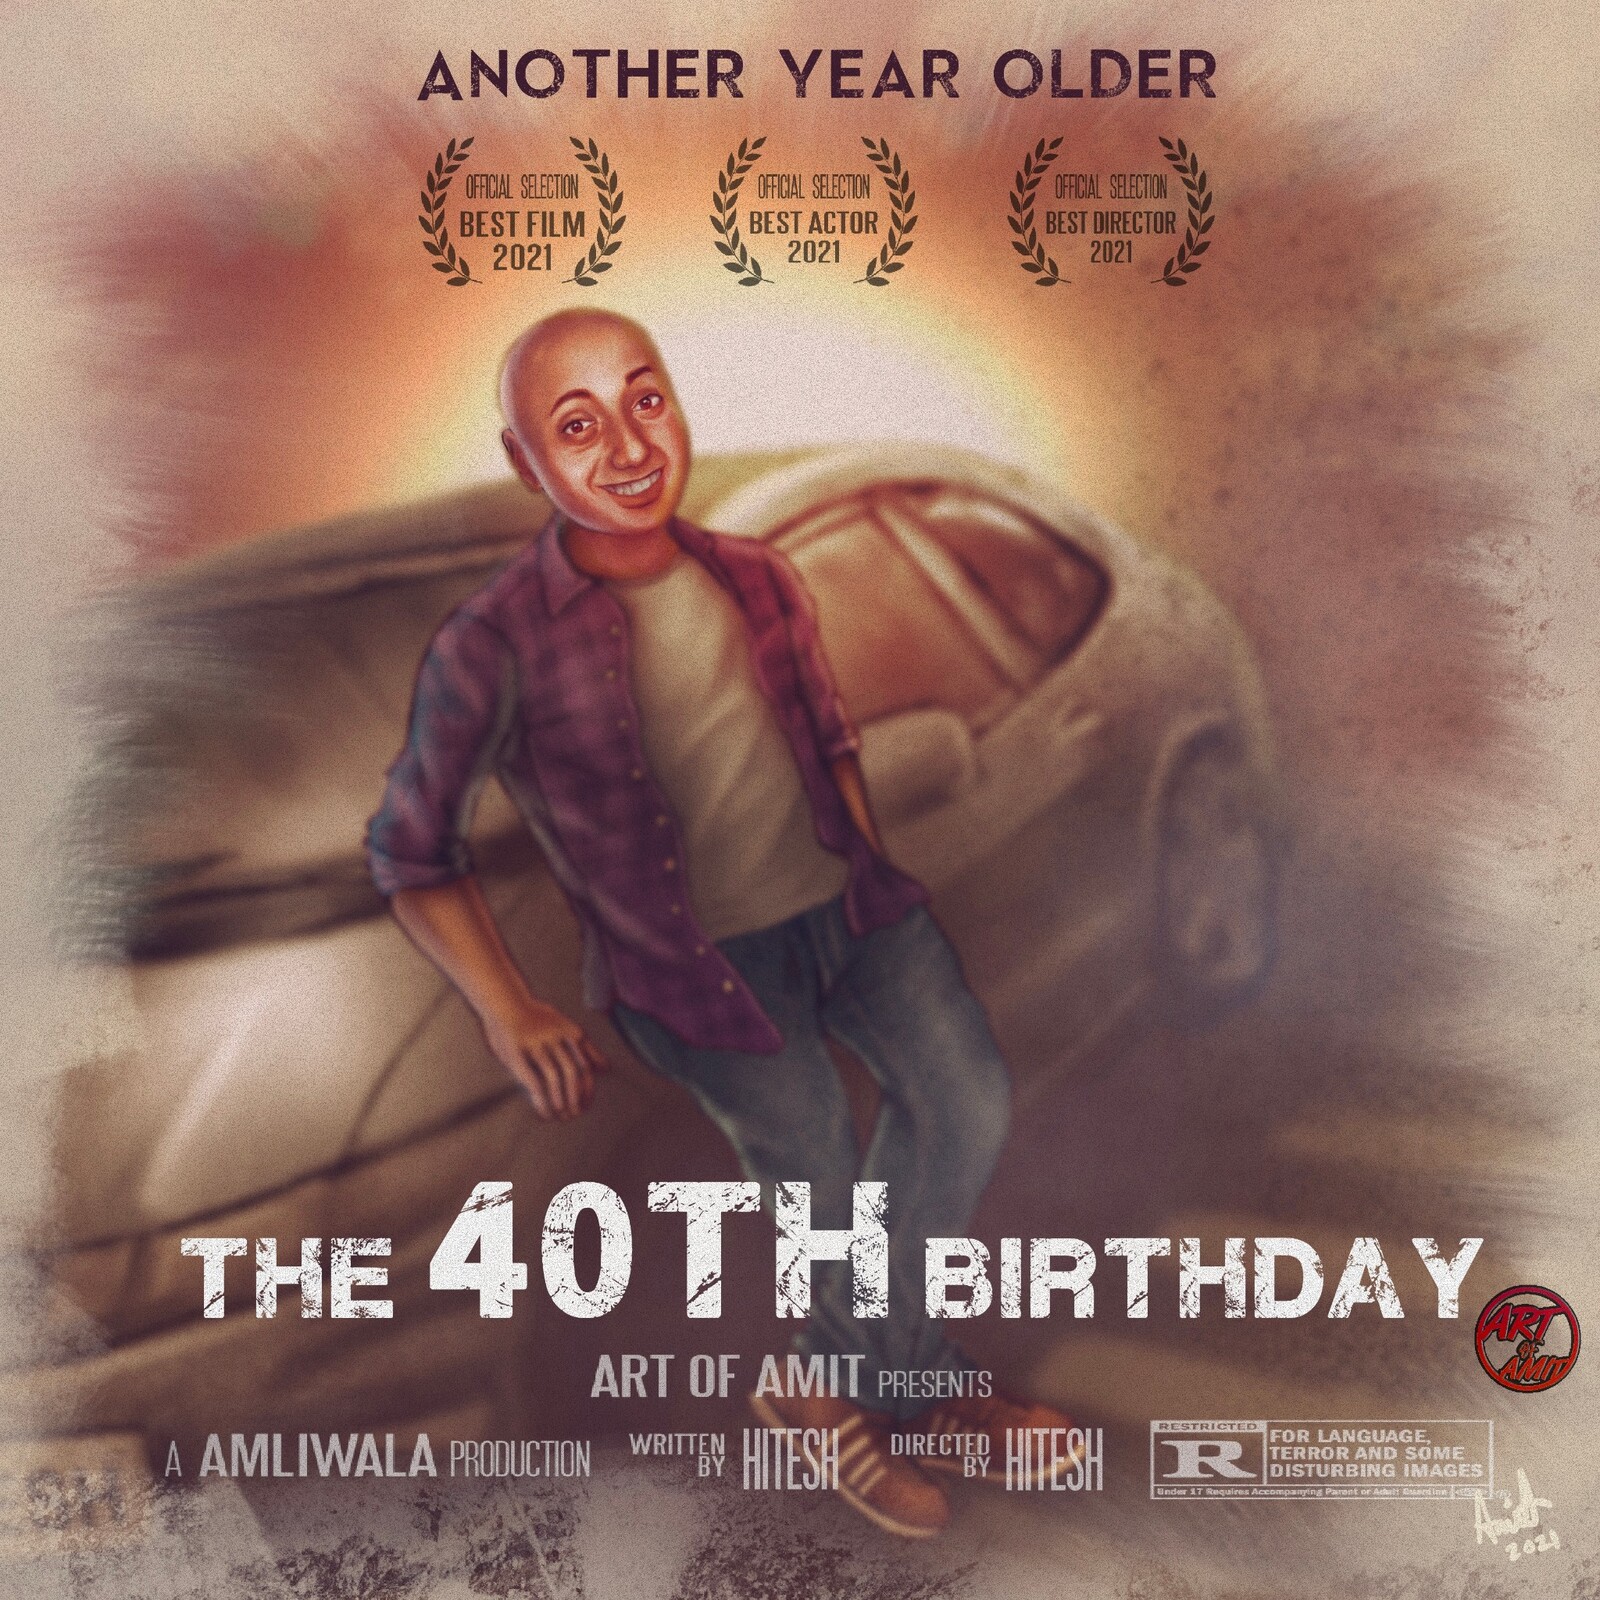 The 40TH